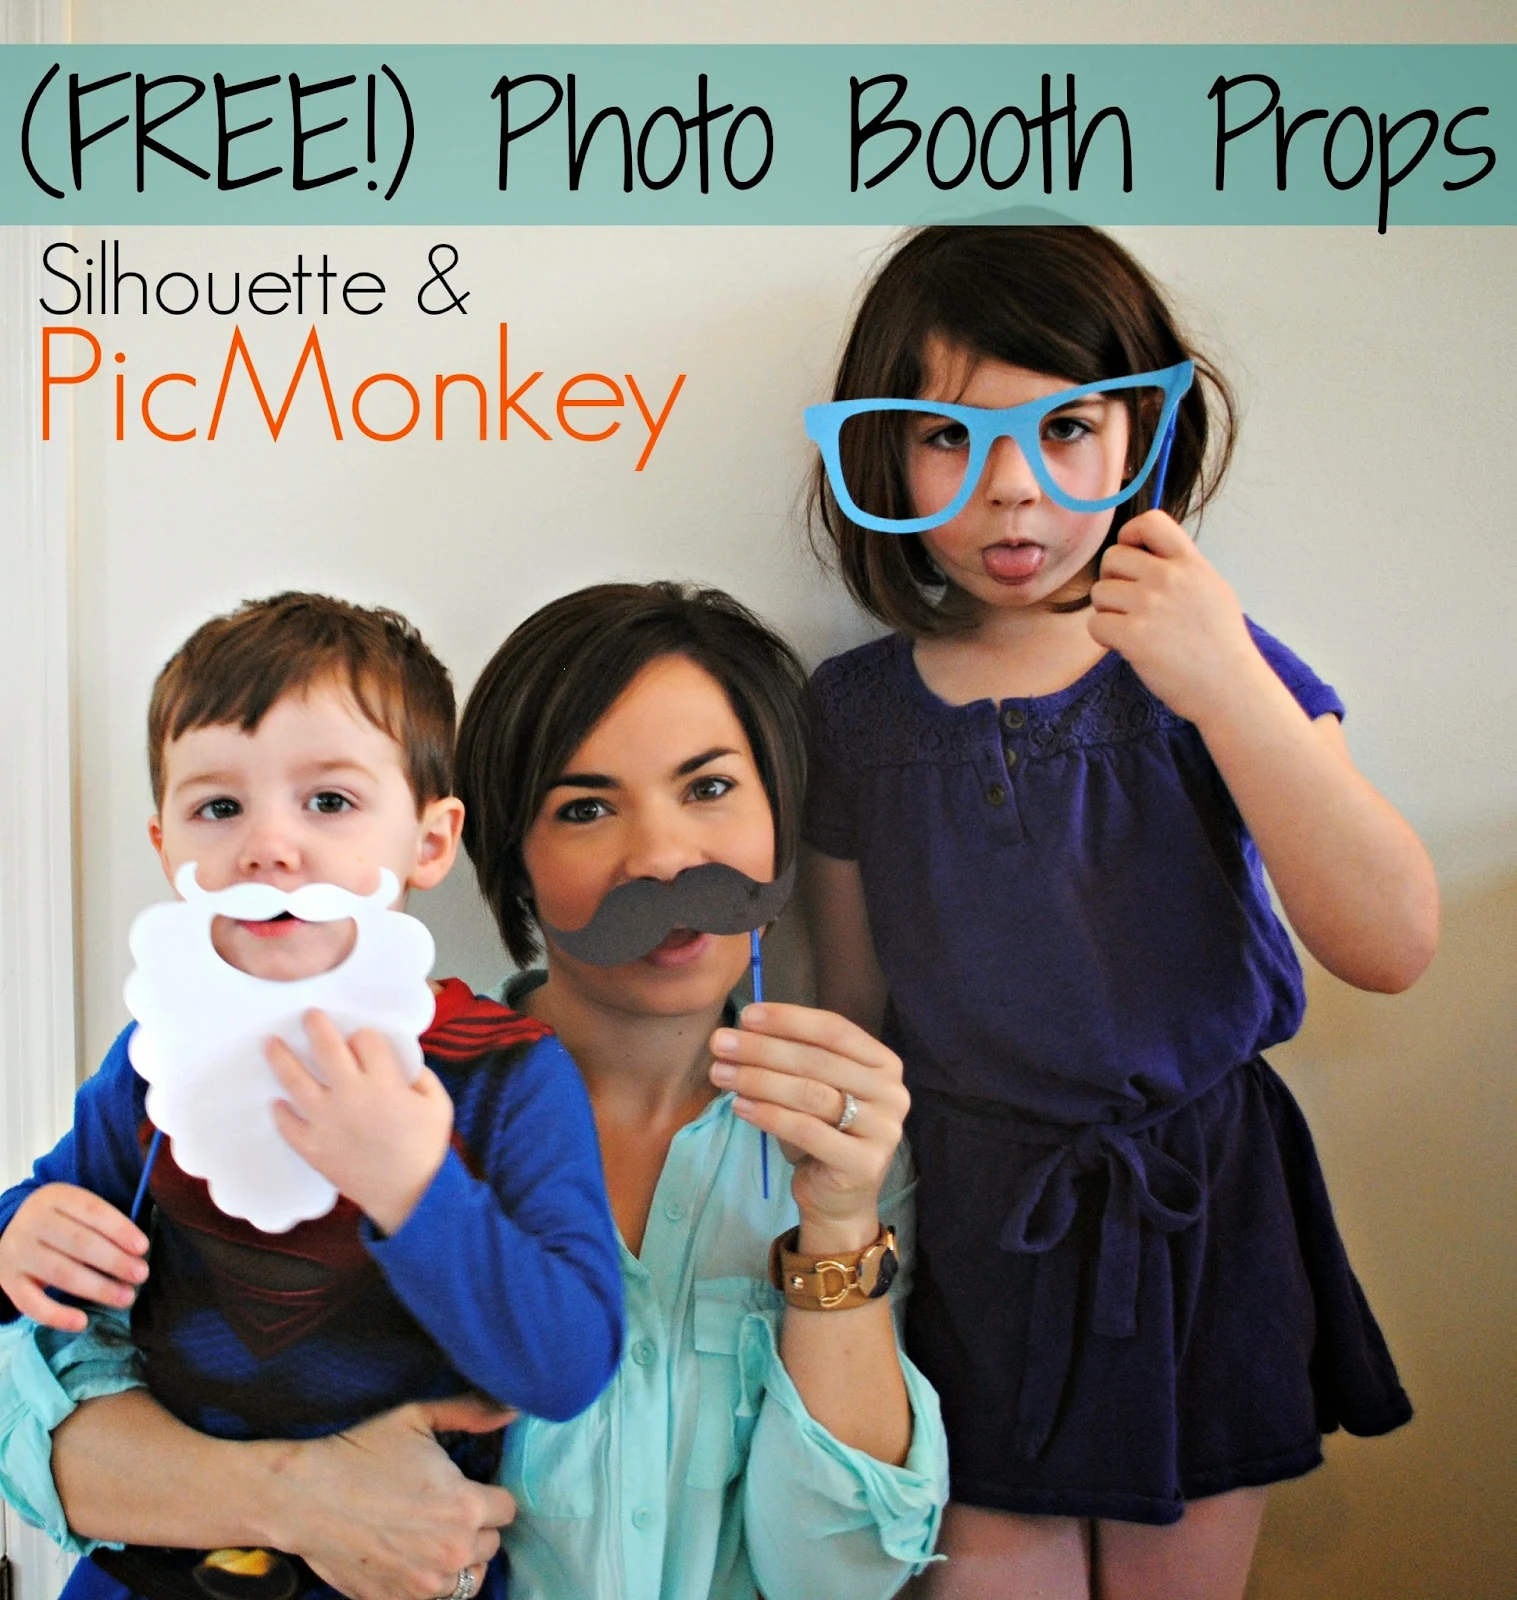 Photobooth props, PicMonkey, Silhouette, DIY, do it yourself, free